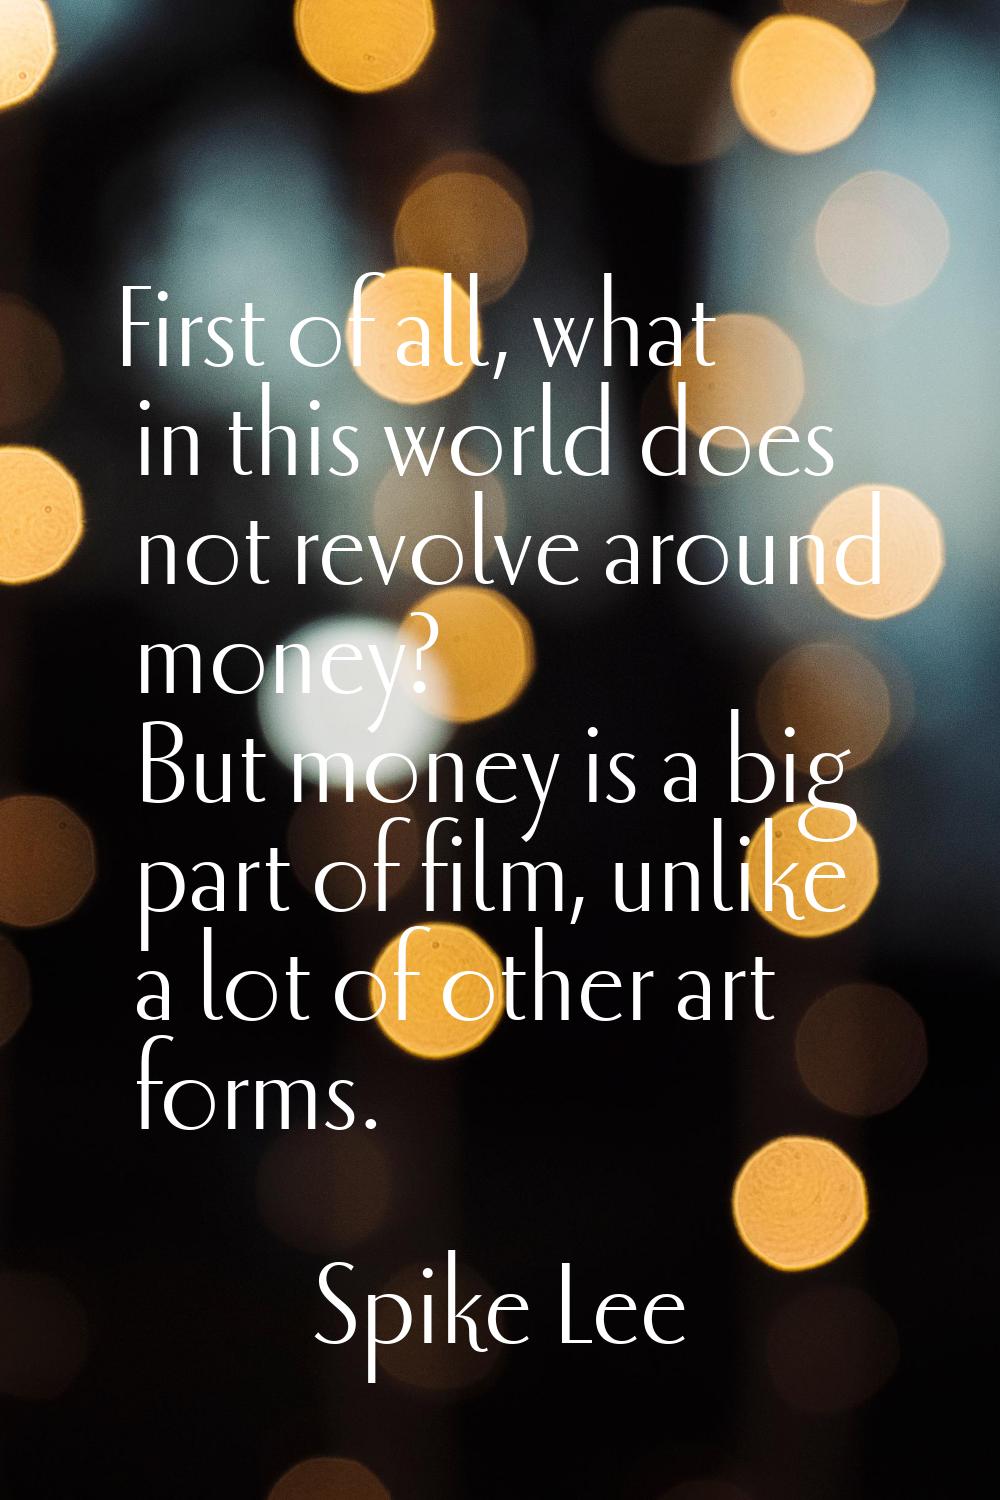 First of all, what in this world does not revolve around money? But money is a big part of film, un